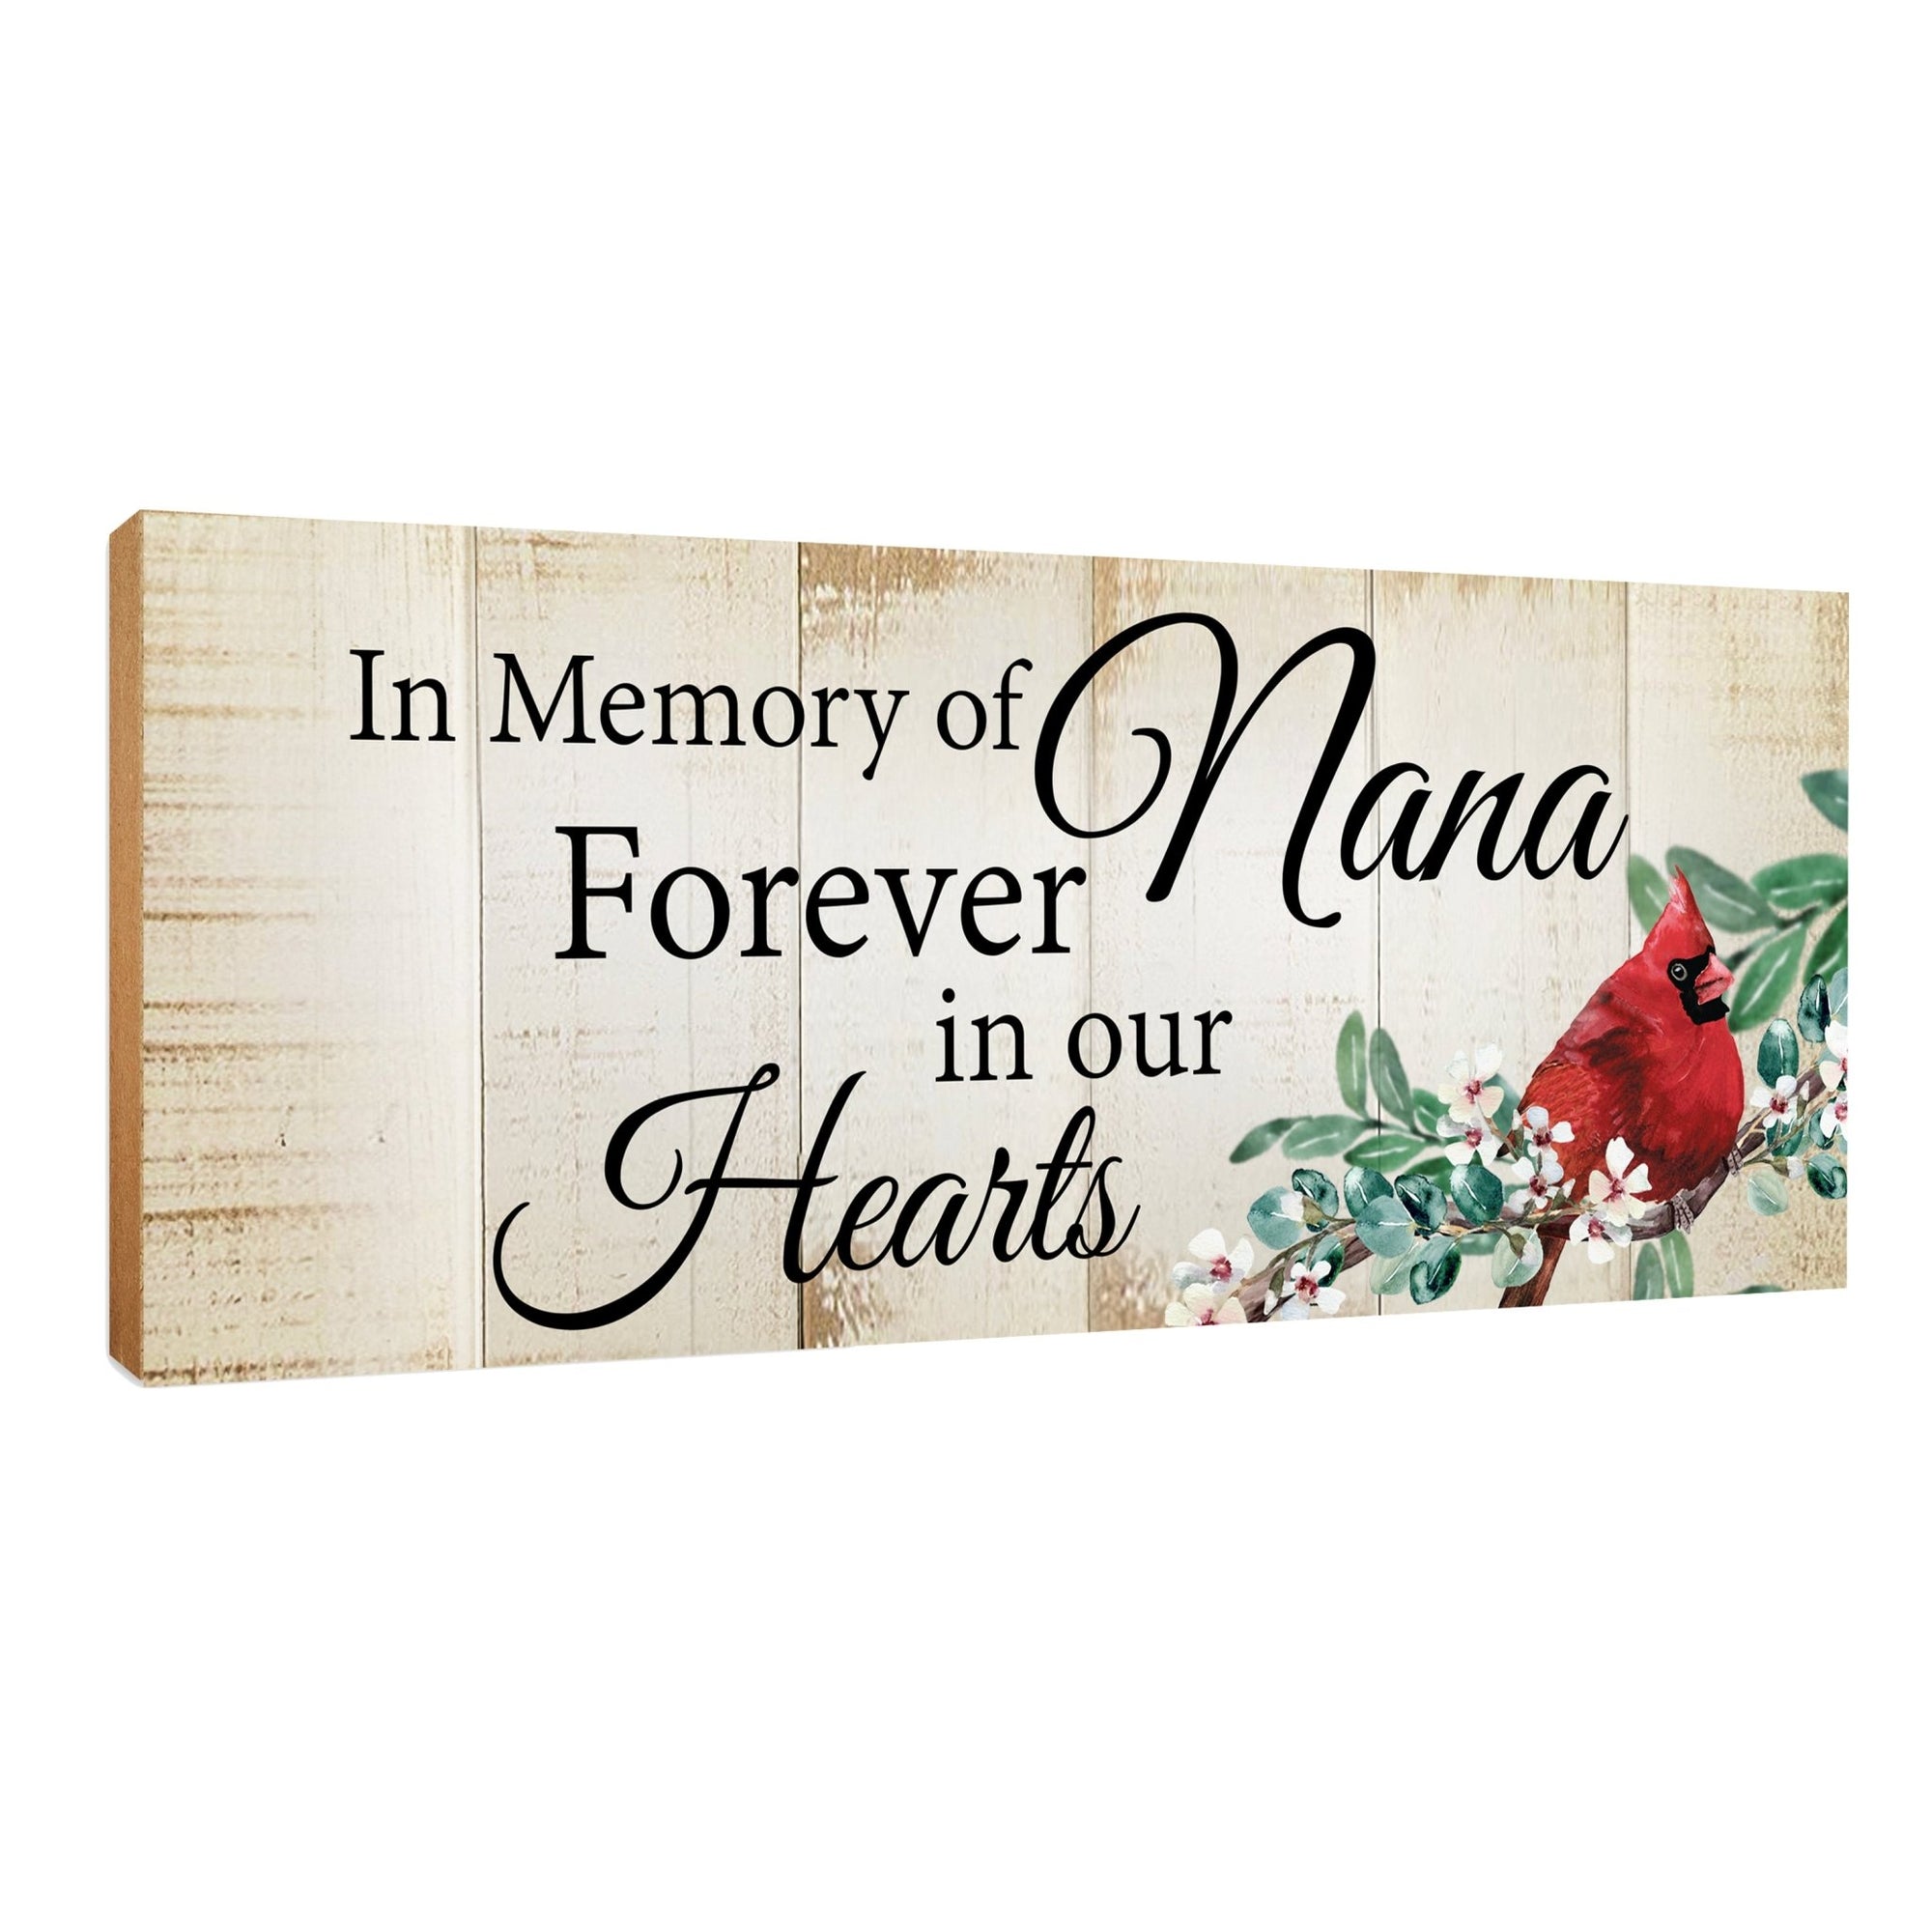 Wooden memorial shelf decor and tabletop signs, thoughtful memorial gifts for those grieving the loss of a loved one.